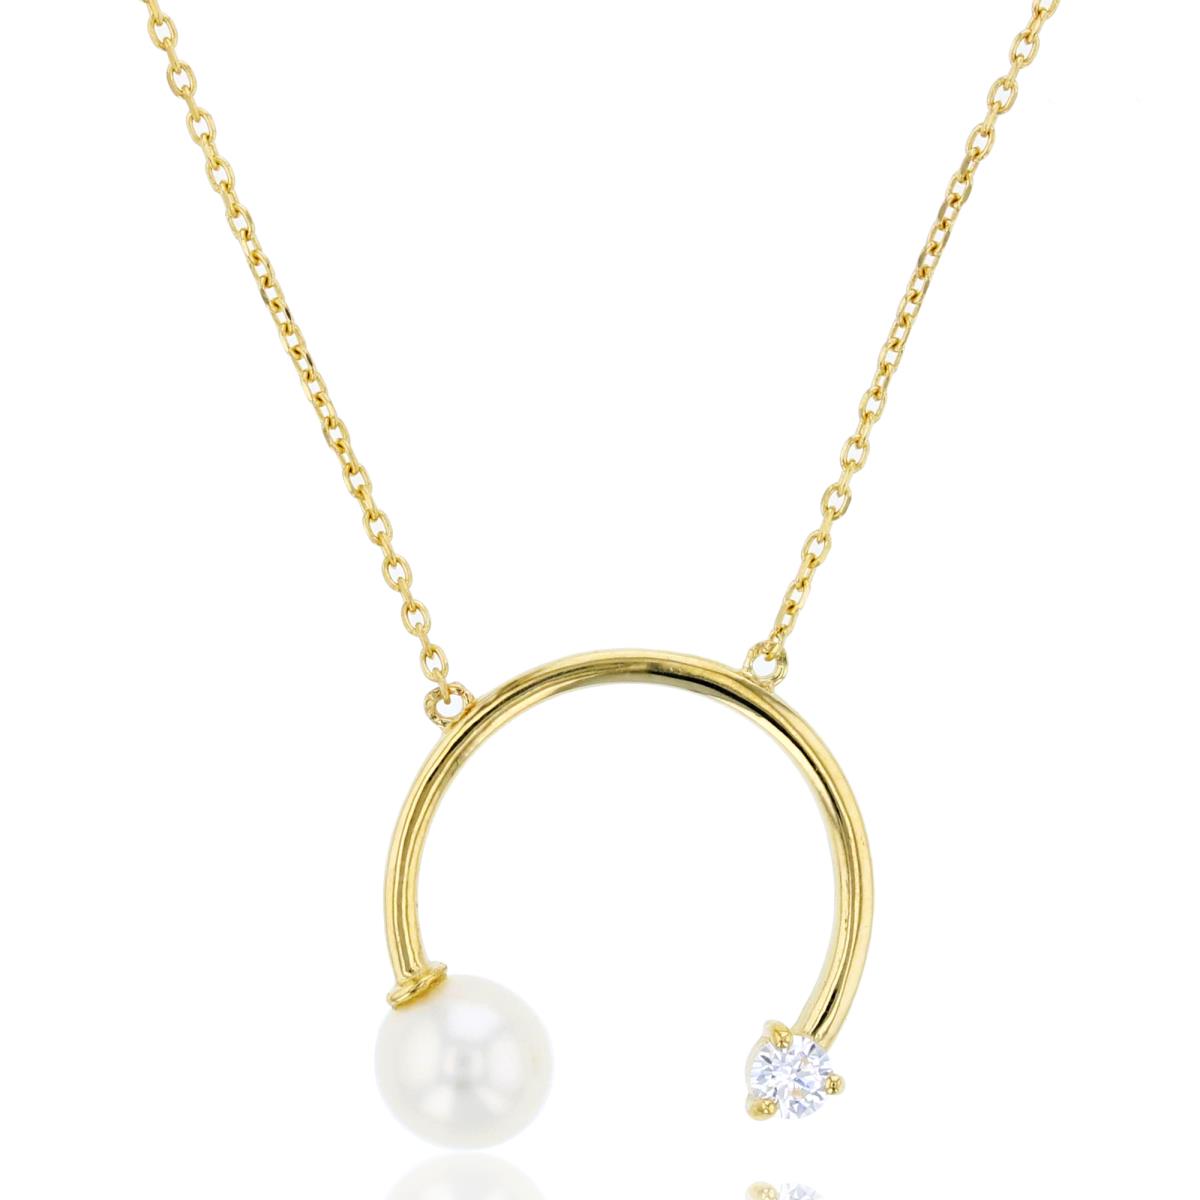 10K Yellow Gold 5mm Fresh Water Pearl & Rnd CZ in Open Half Circle 18"+2"Necklace